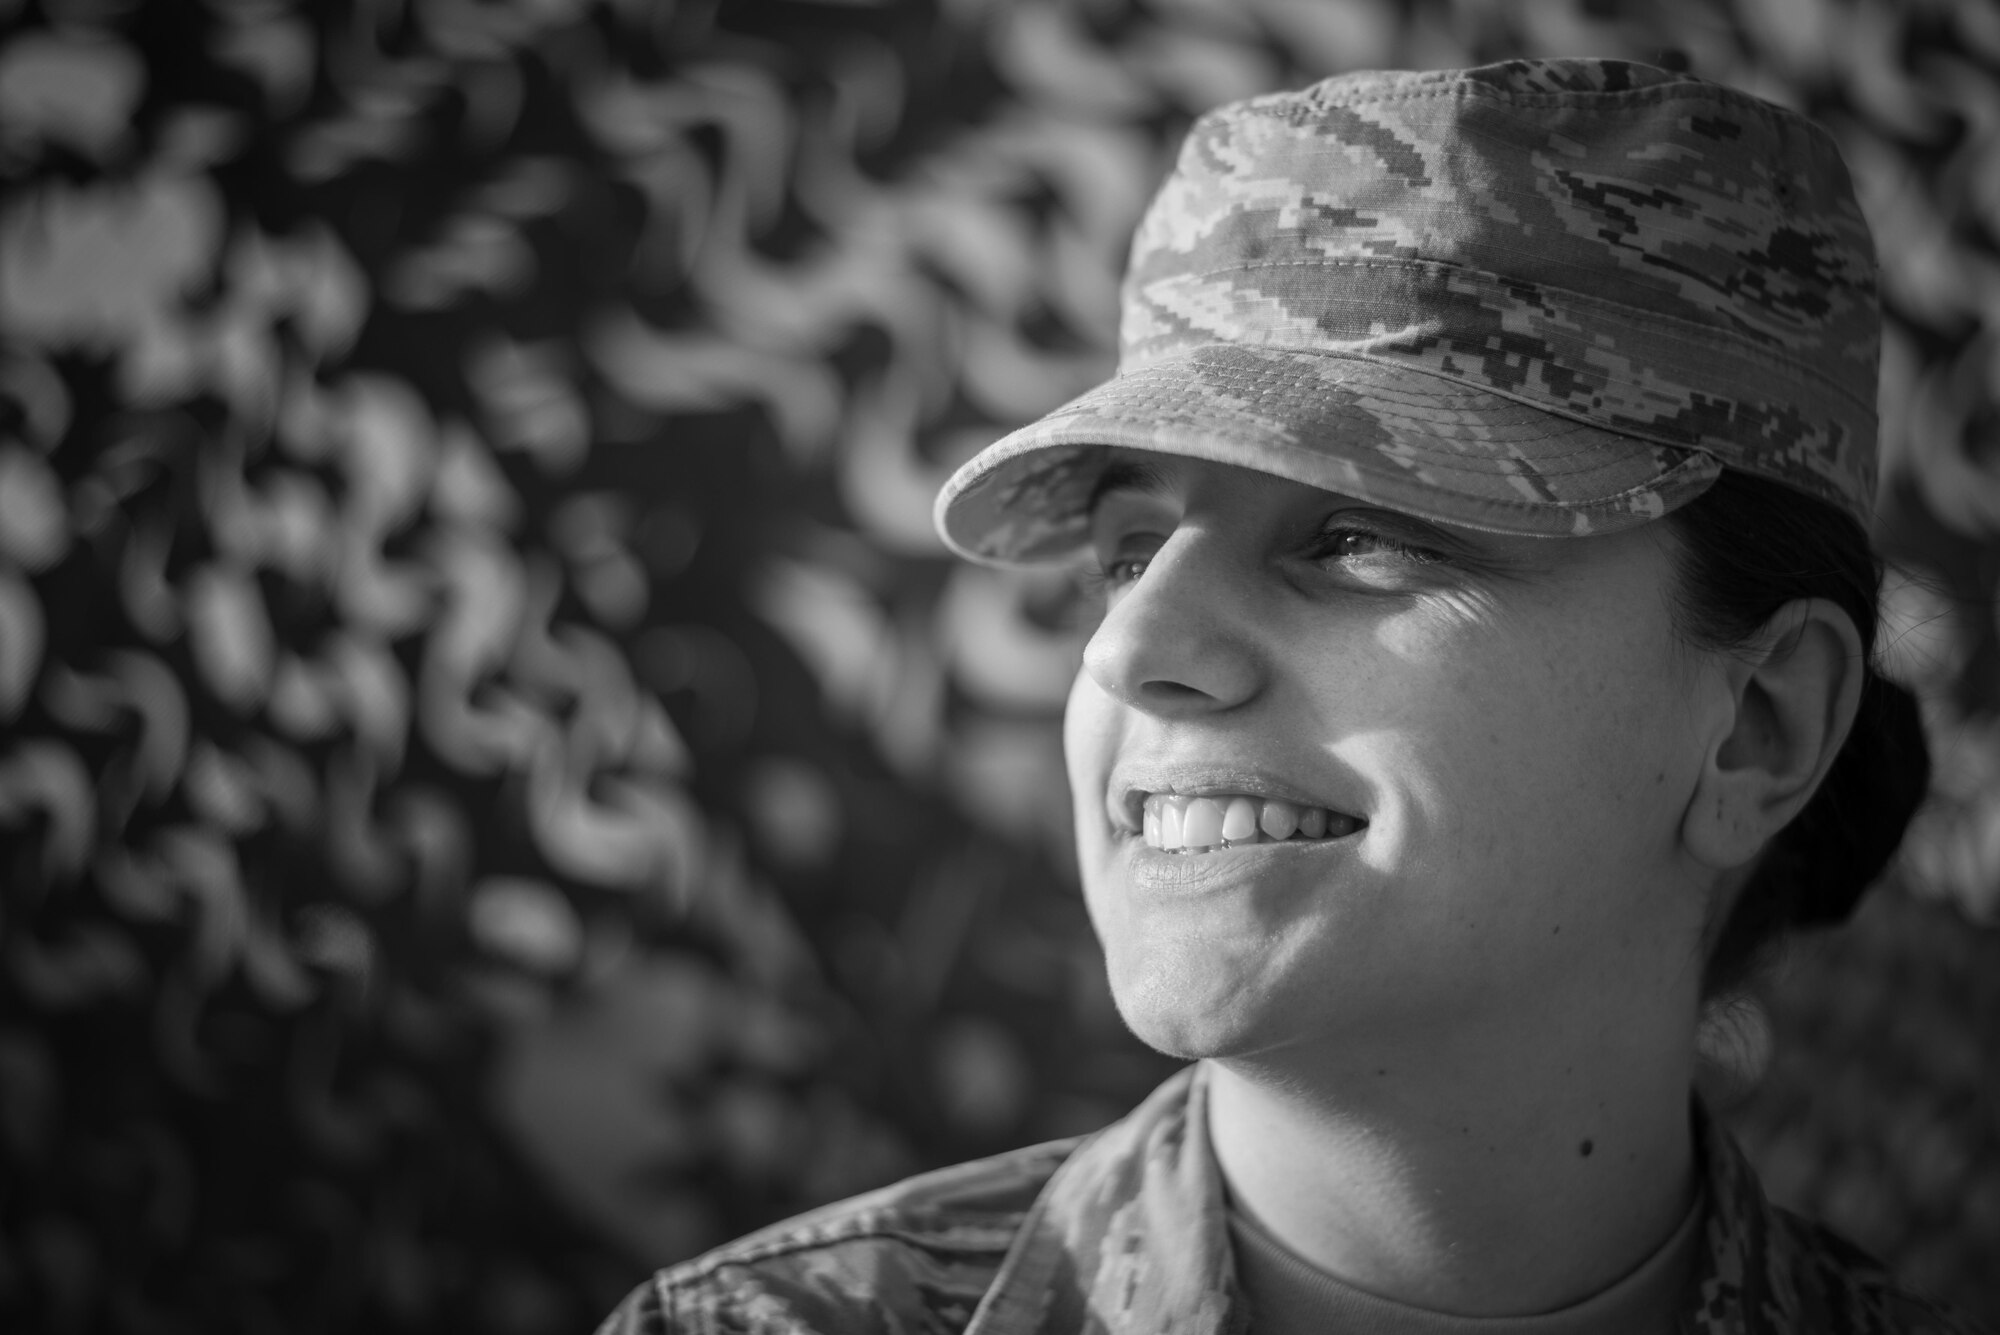 Airman 1st Class Dijana Jakimoska, 407th Expeditionary Force Support Squadron, poses for a photo at the 407th Air Expeditionary Group, Dec. 9, 2017. Jakimoska moved to the U.S. from Ohrid, Macedonia, when she was 21 years old. 
(U.S. Air Force photo/Master Sgt. Benjamin Wilson)(Released)